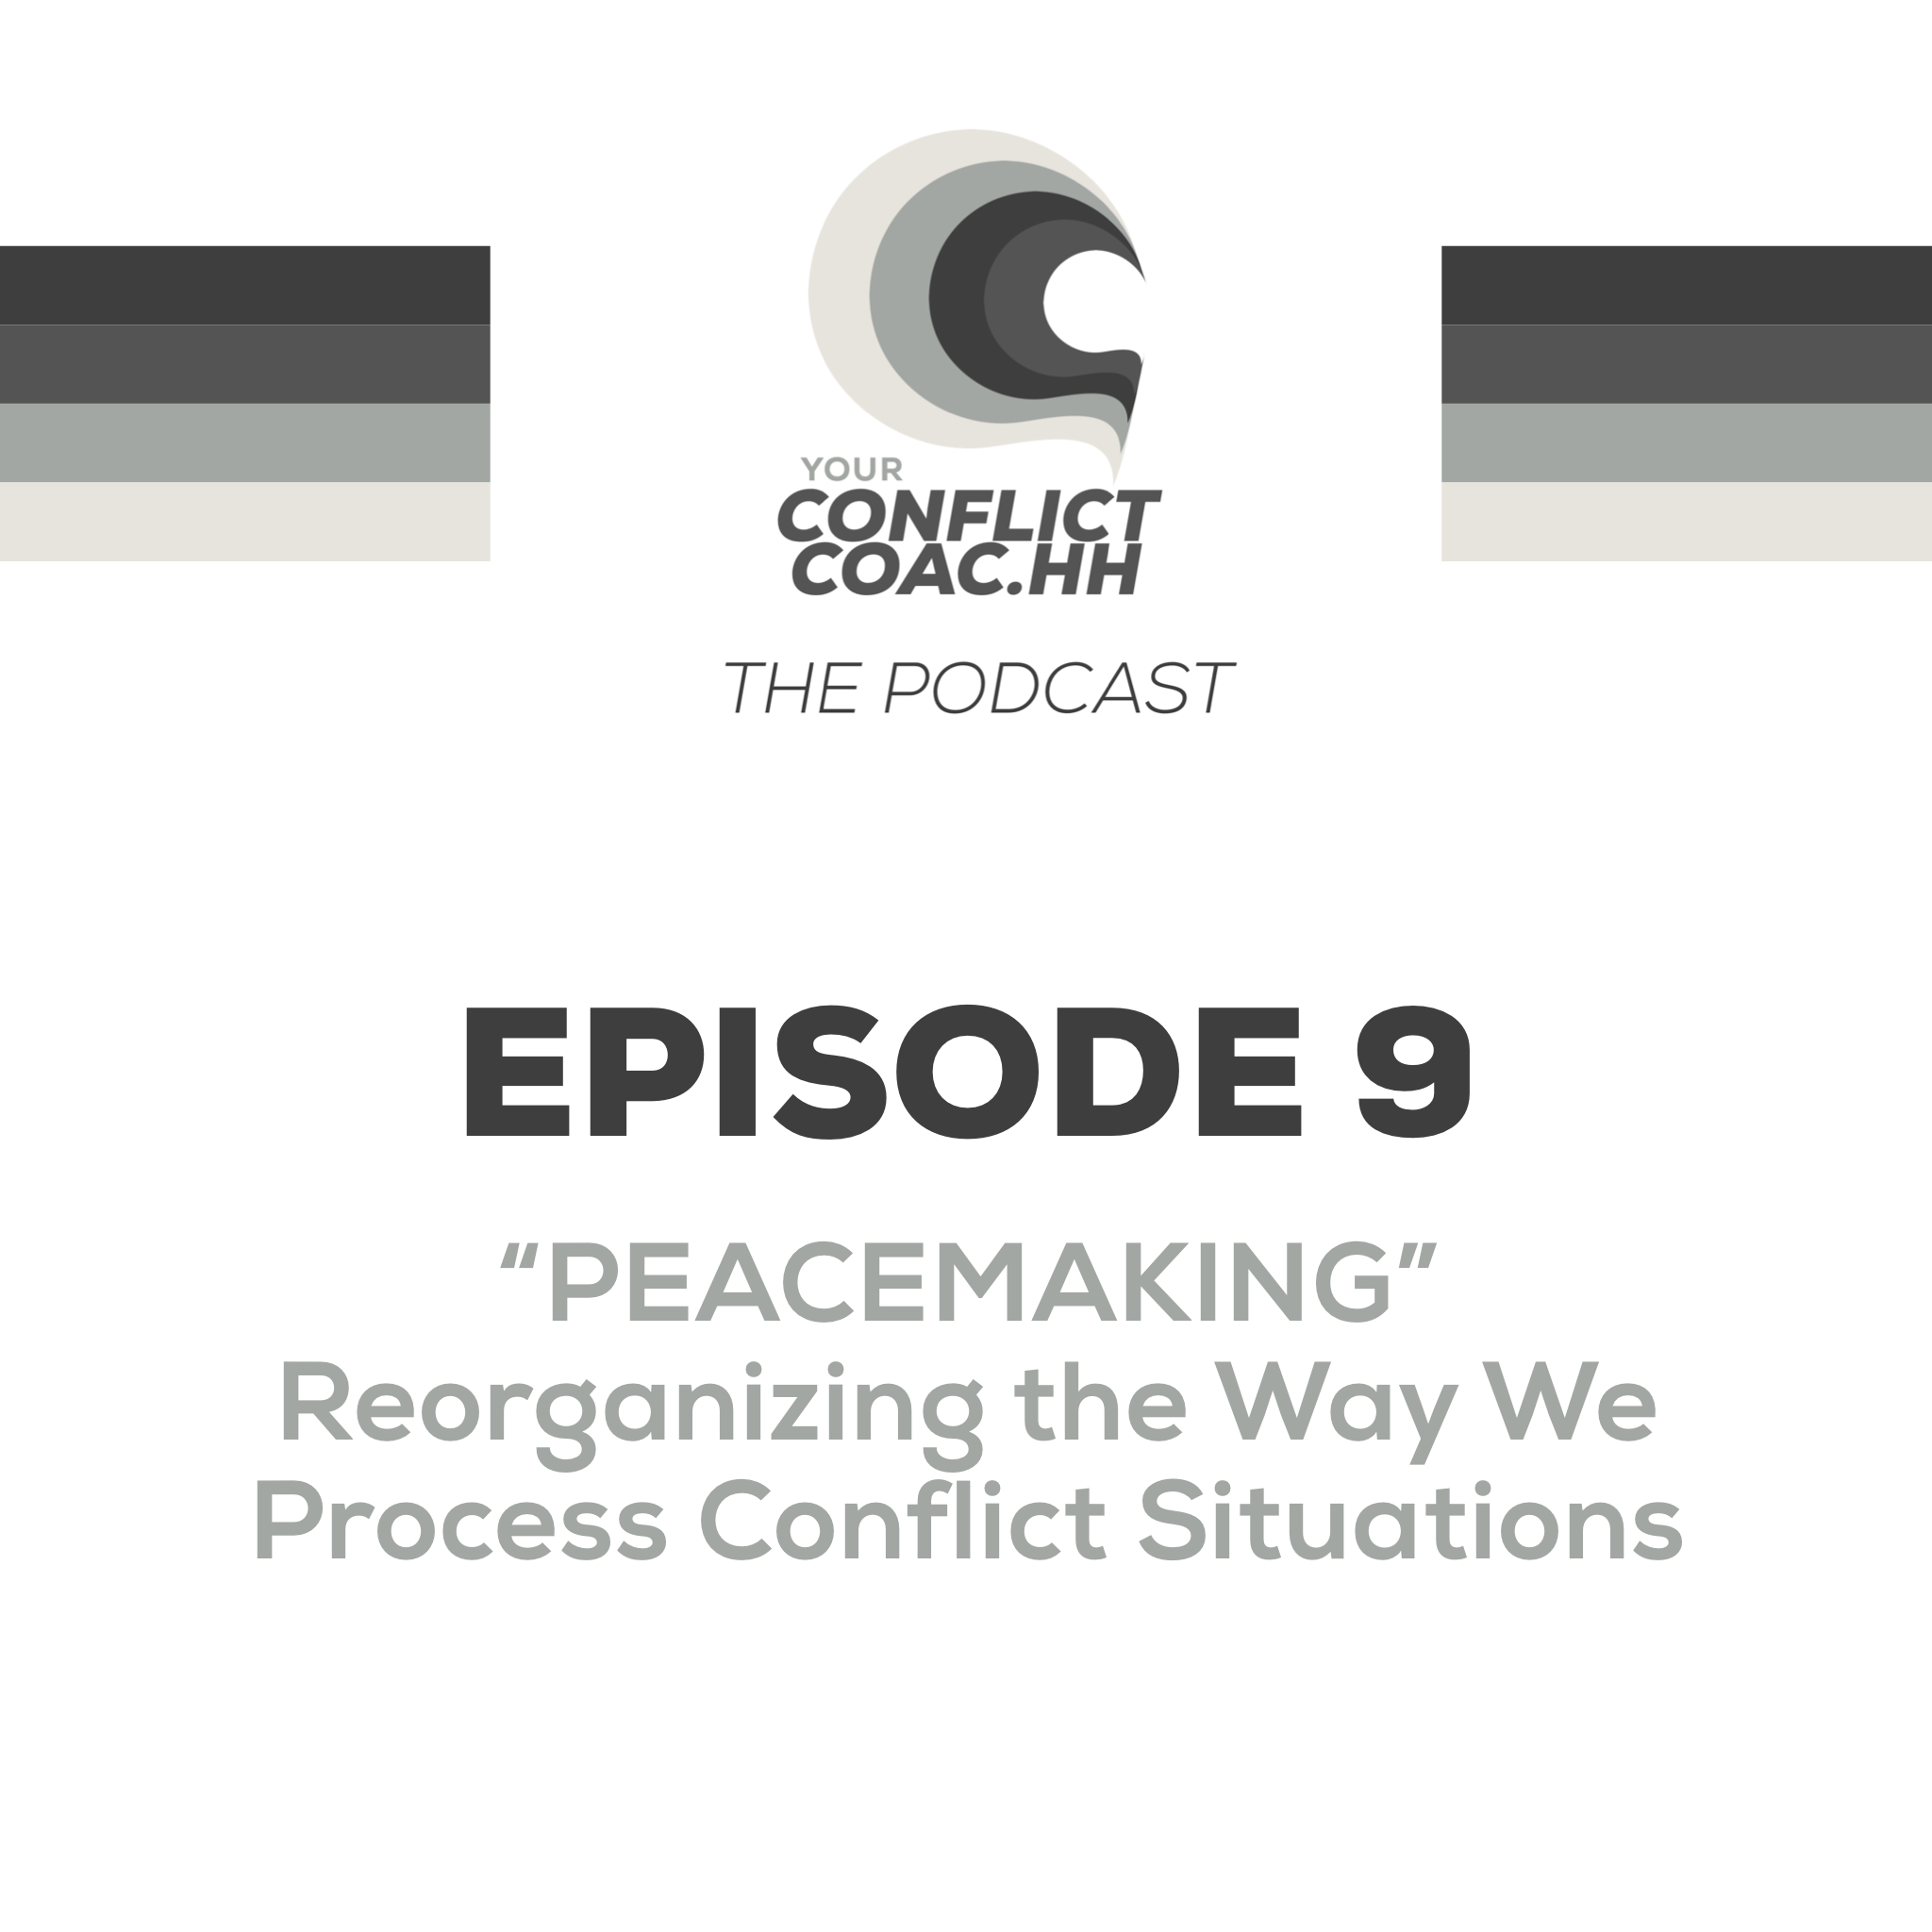 PEACEMAKING - Reorganizing the Way We Process Conflict Situations